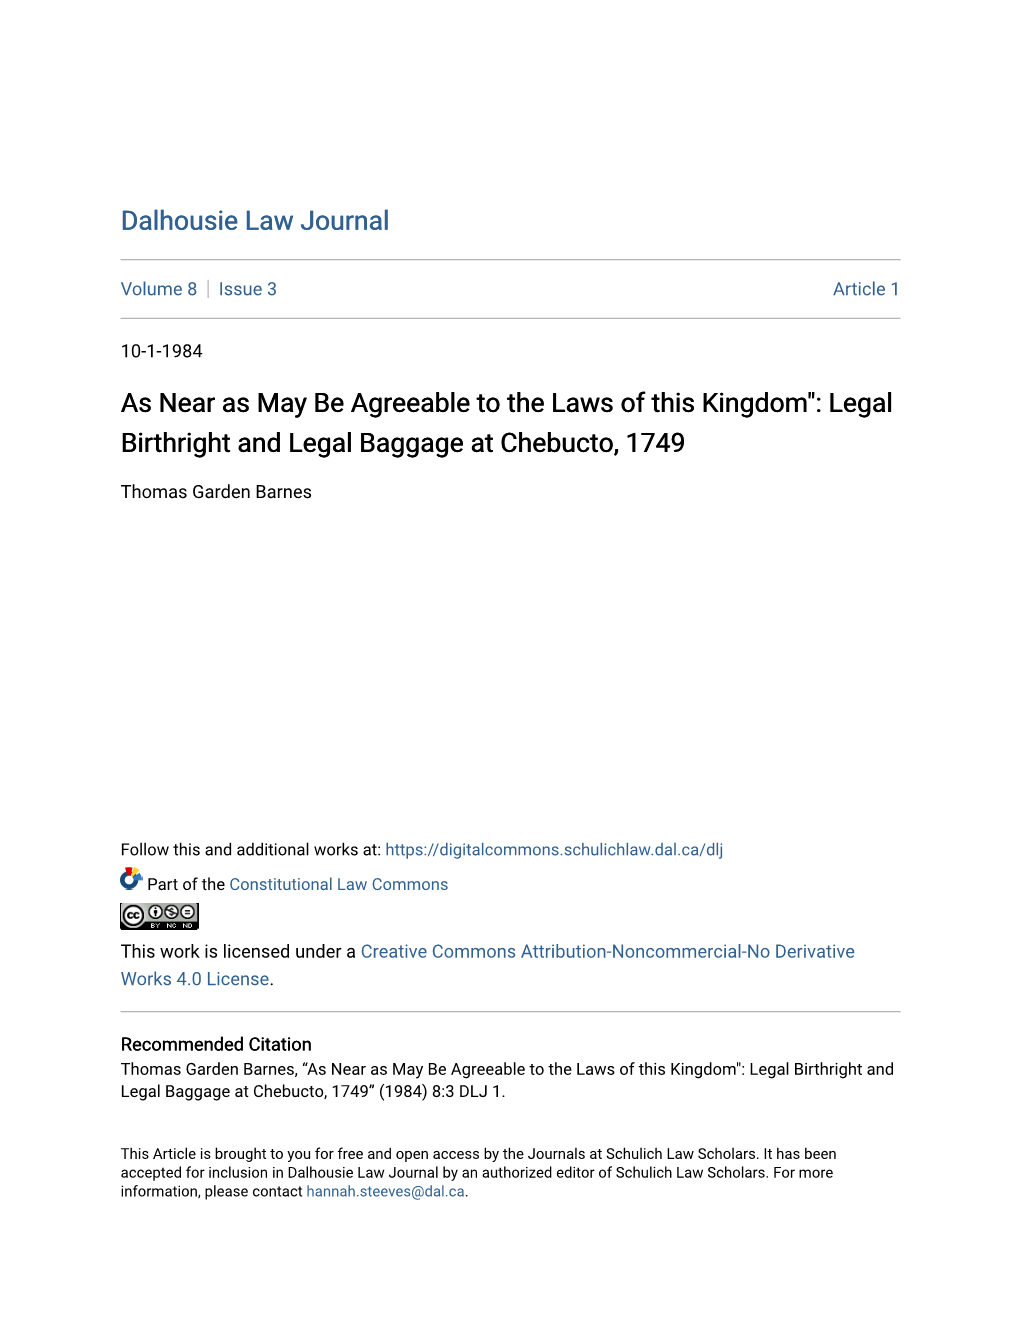 As Near As May Be Agreeable to the Laws of This Kingdom": Legal Birthright and Legal Baggage at Chebucto, 1749